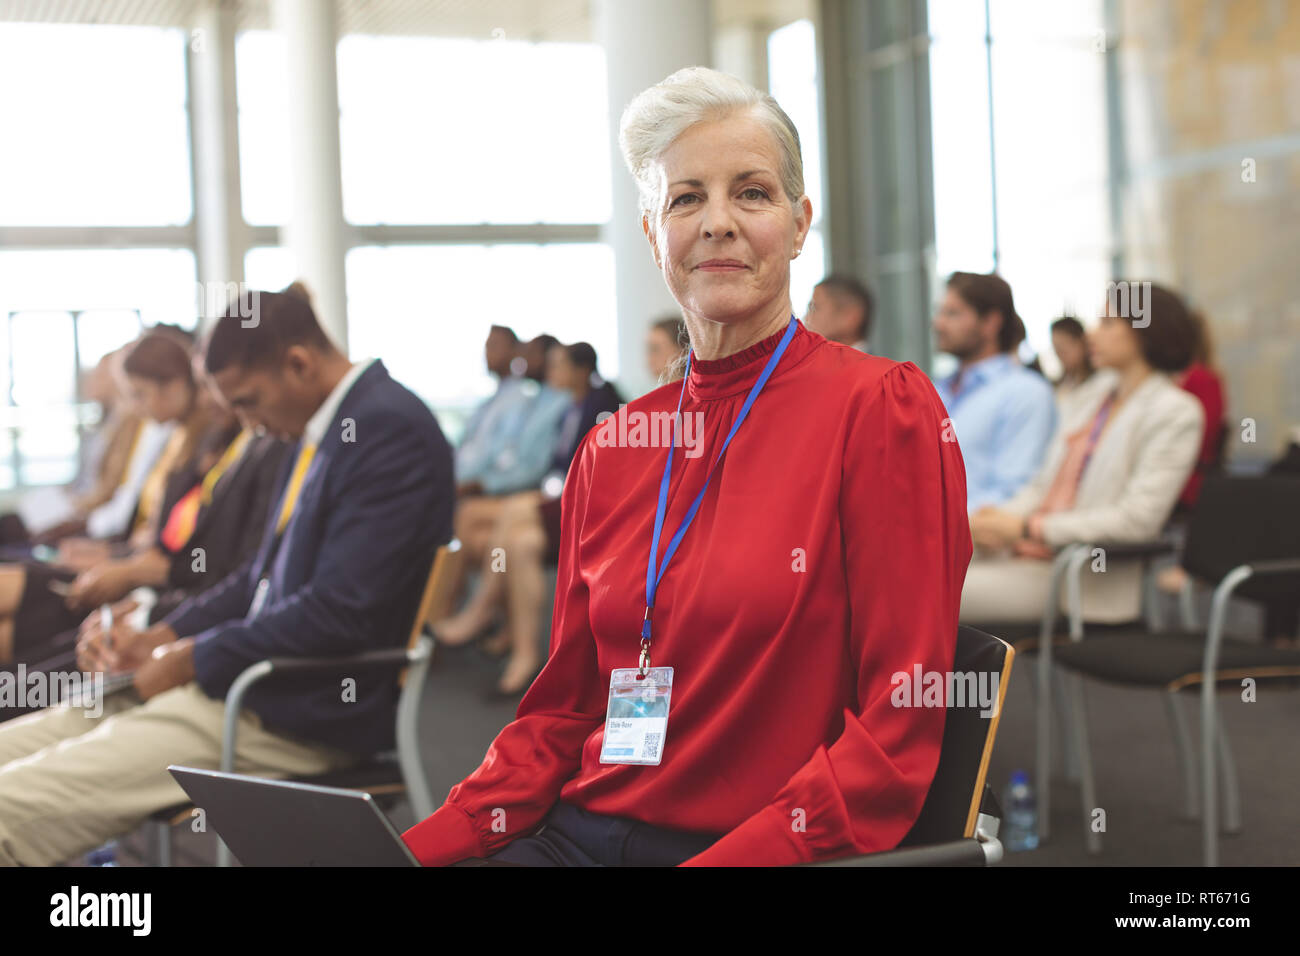 Mature businesswoman with laptop looking at camera during seminar Stock Photo